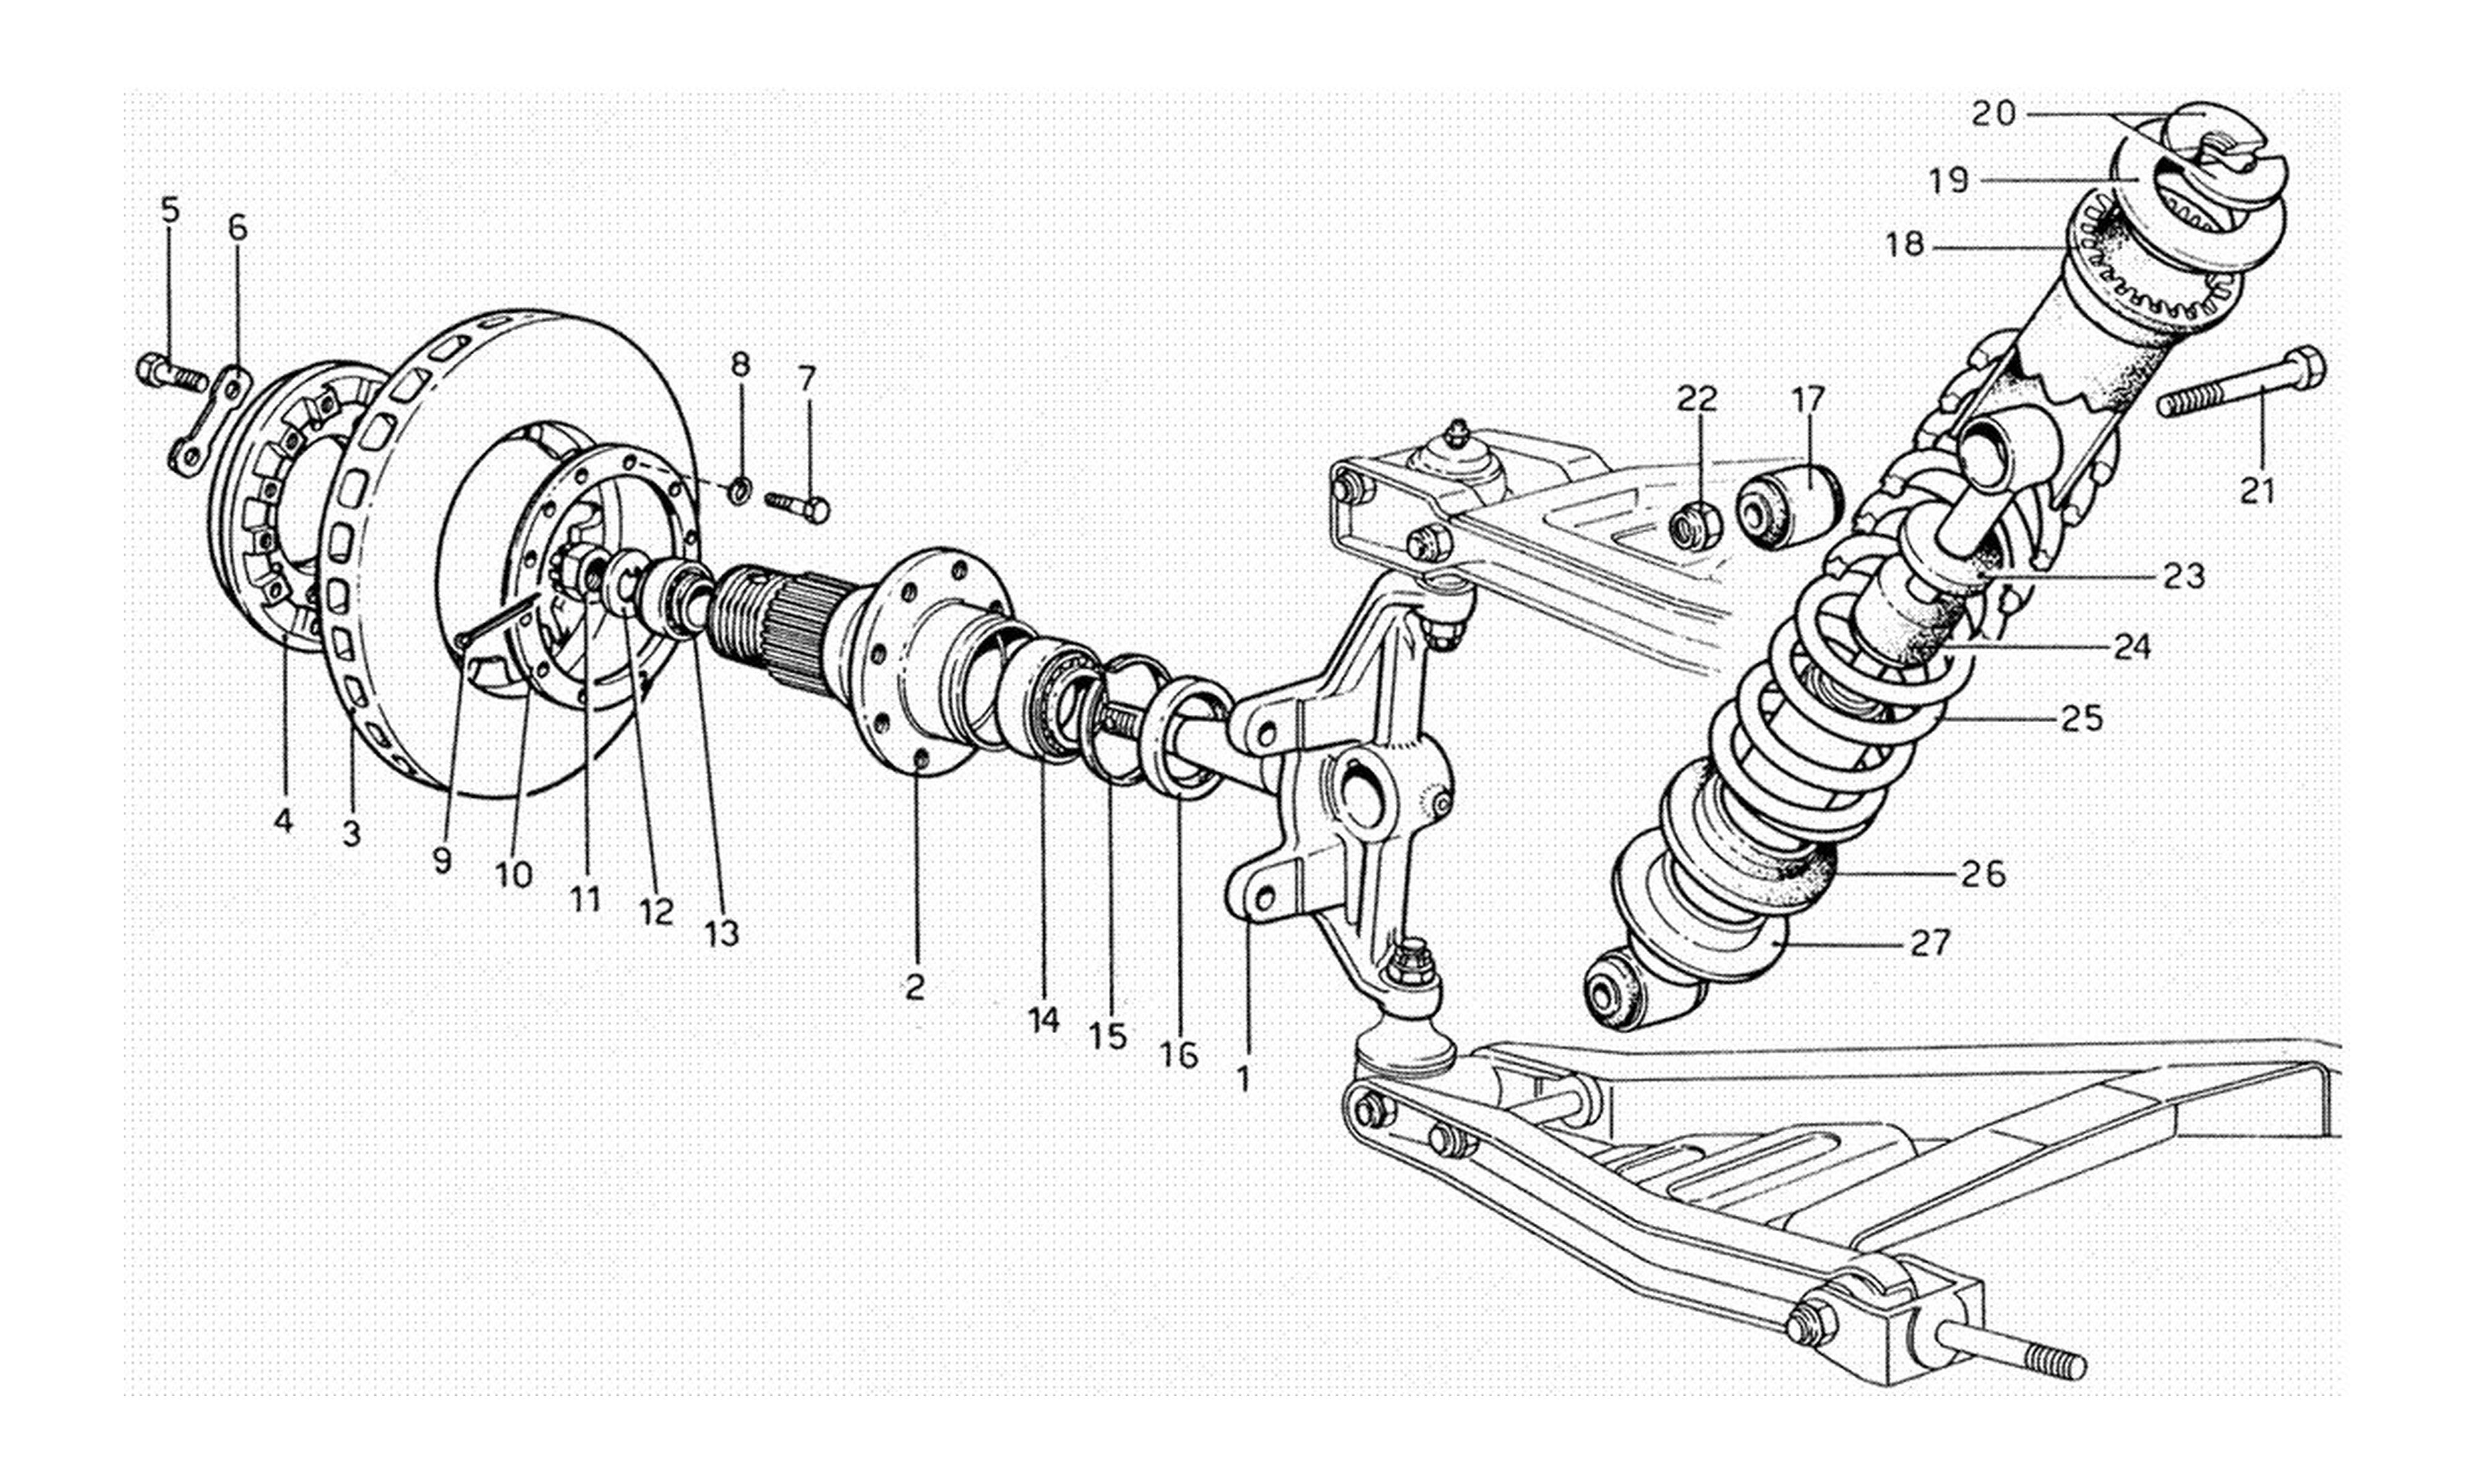 Schematic: Front Suspension Shock Absorber